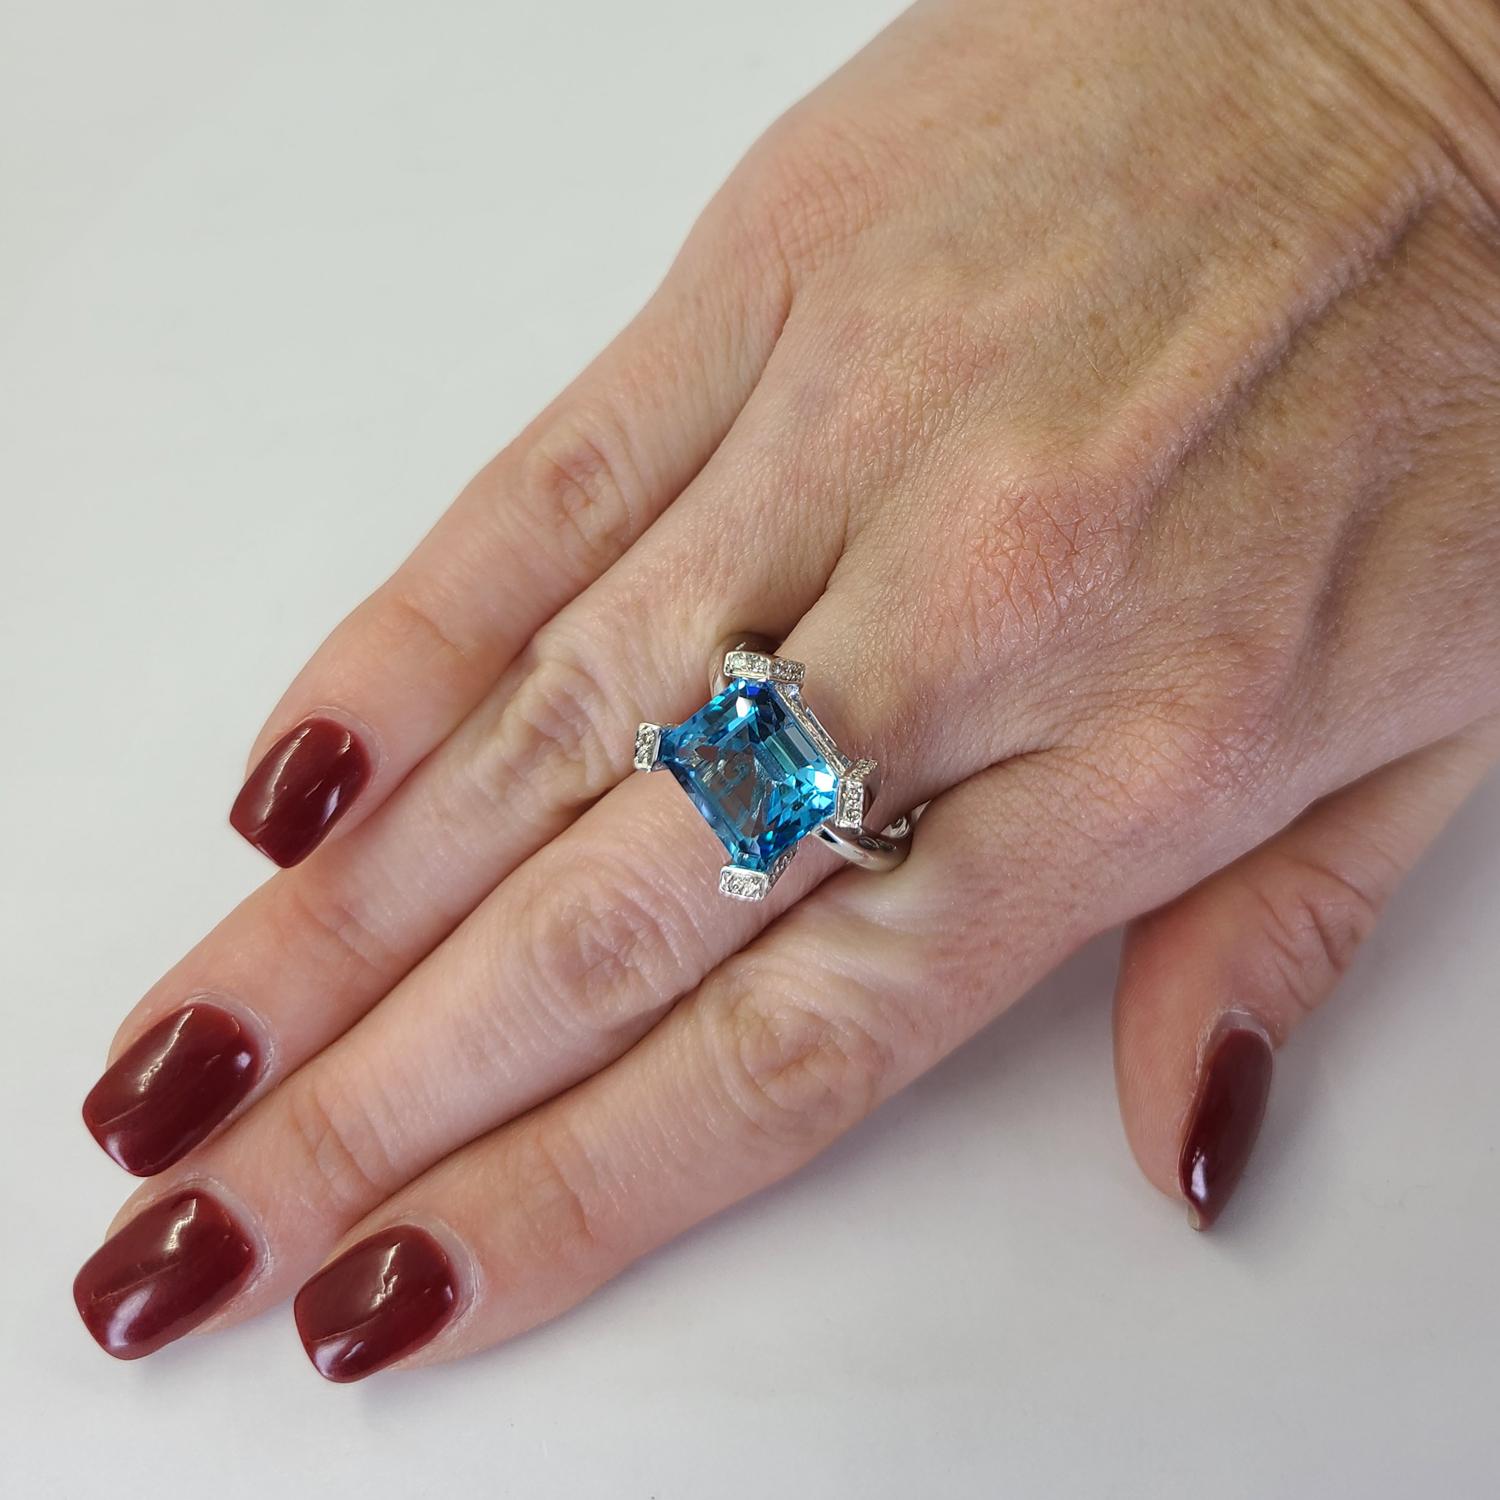 18 Karat White Gold Ring Featuring An Emerald Cut Blue Topaz Weighing Approximately 5 Carats Accented By 58 Round Diamonds Of VS Clarity & H Color Totaling 0.58 Carats. Finger Size 8.5. Finished Weight Is 8.6 Grams.